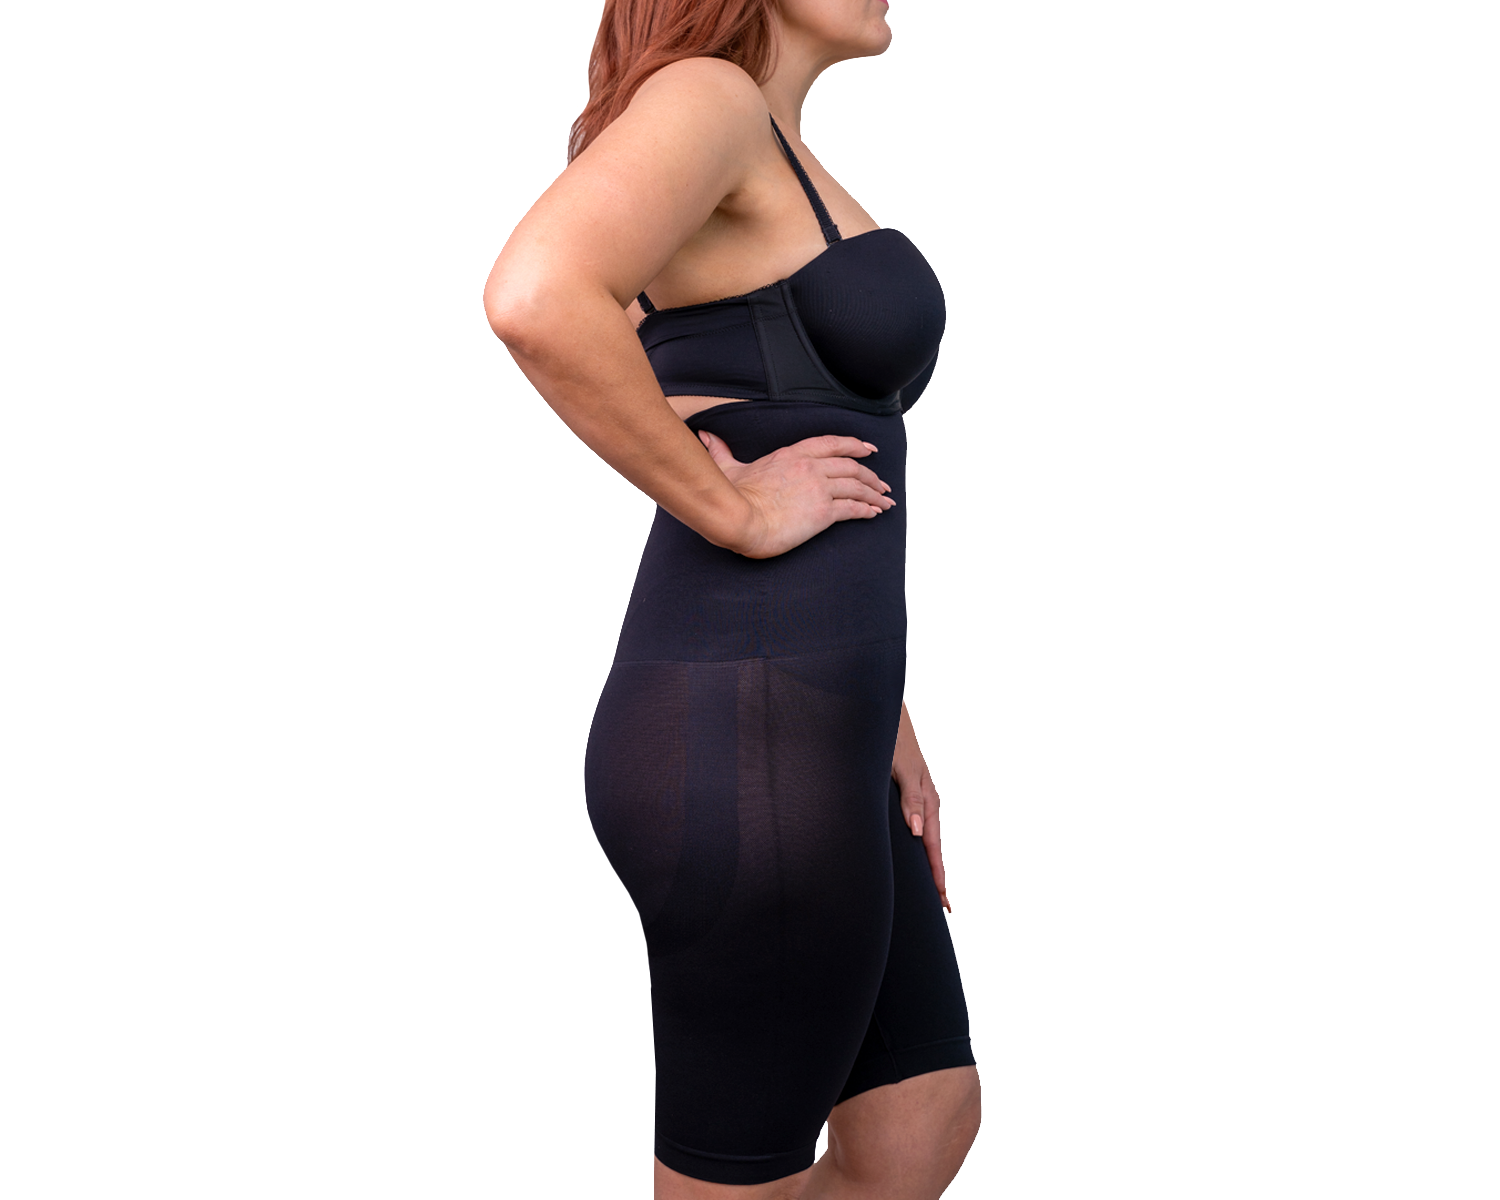 EMPETUA High Waisted Body Shaper Shorts - Shapewear for Women Tummy Control  Small to Plus-Size